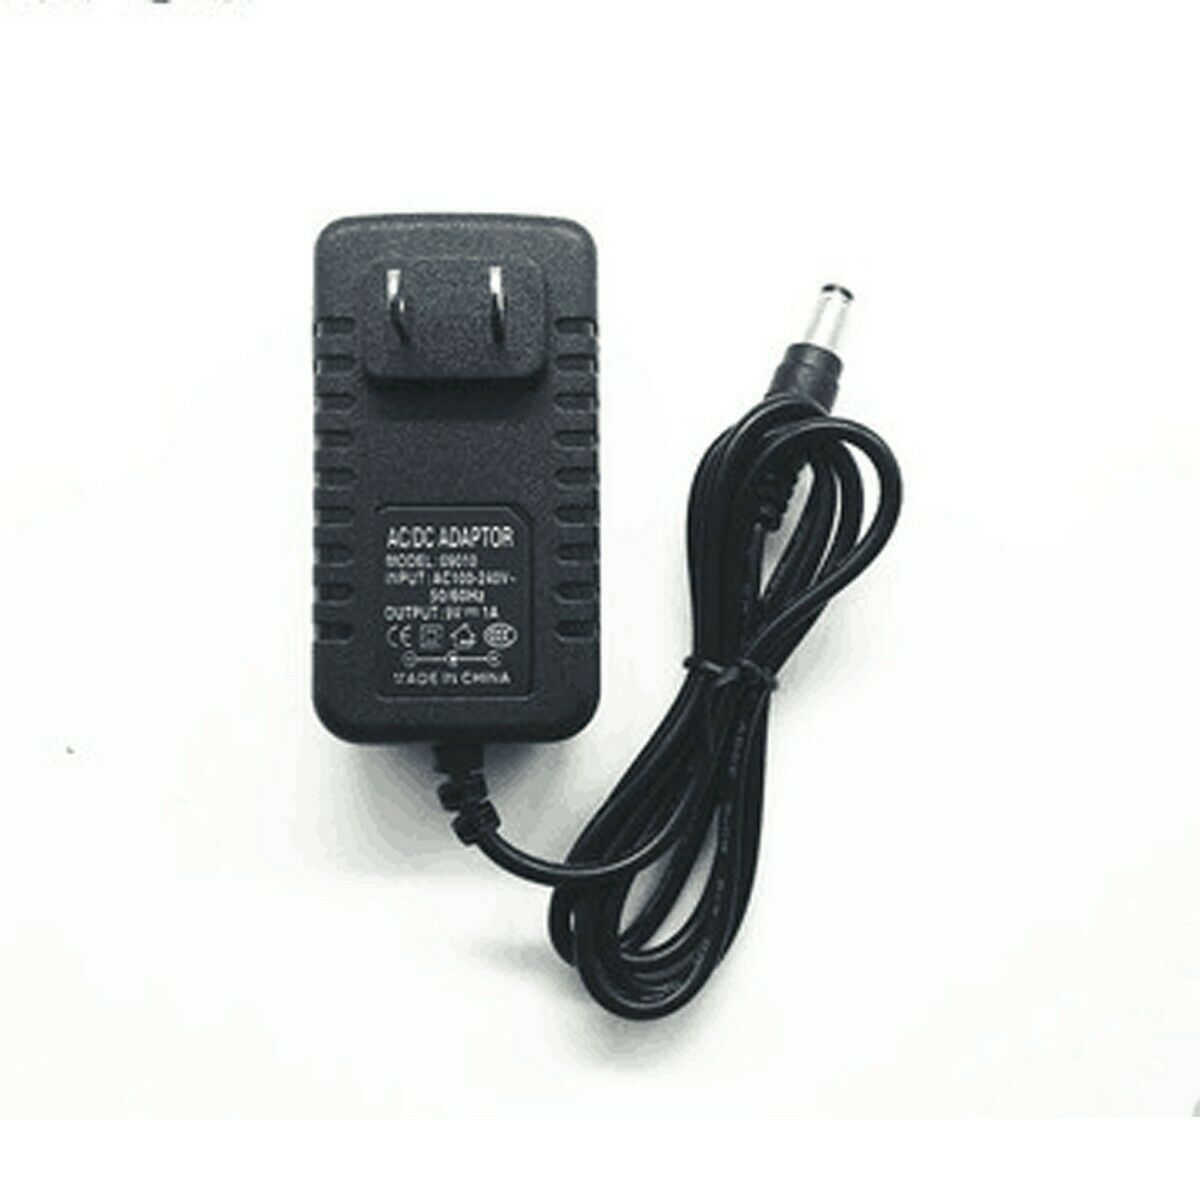 AC - DC Adapter For Honeywell 46-00525 Power Supply MS95XX VOYAGER 1200G 4600525 Brand: Unbranded Type: Adapter Outp